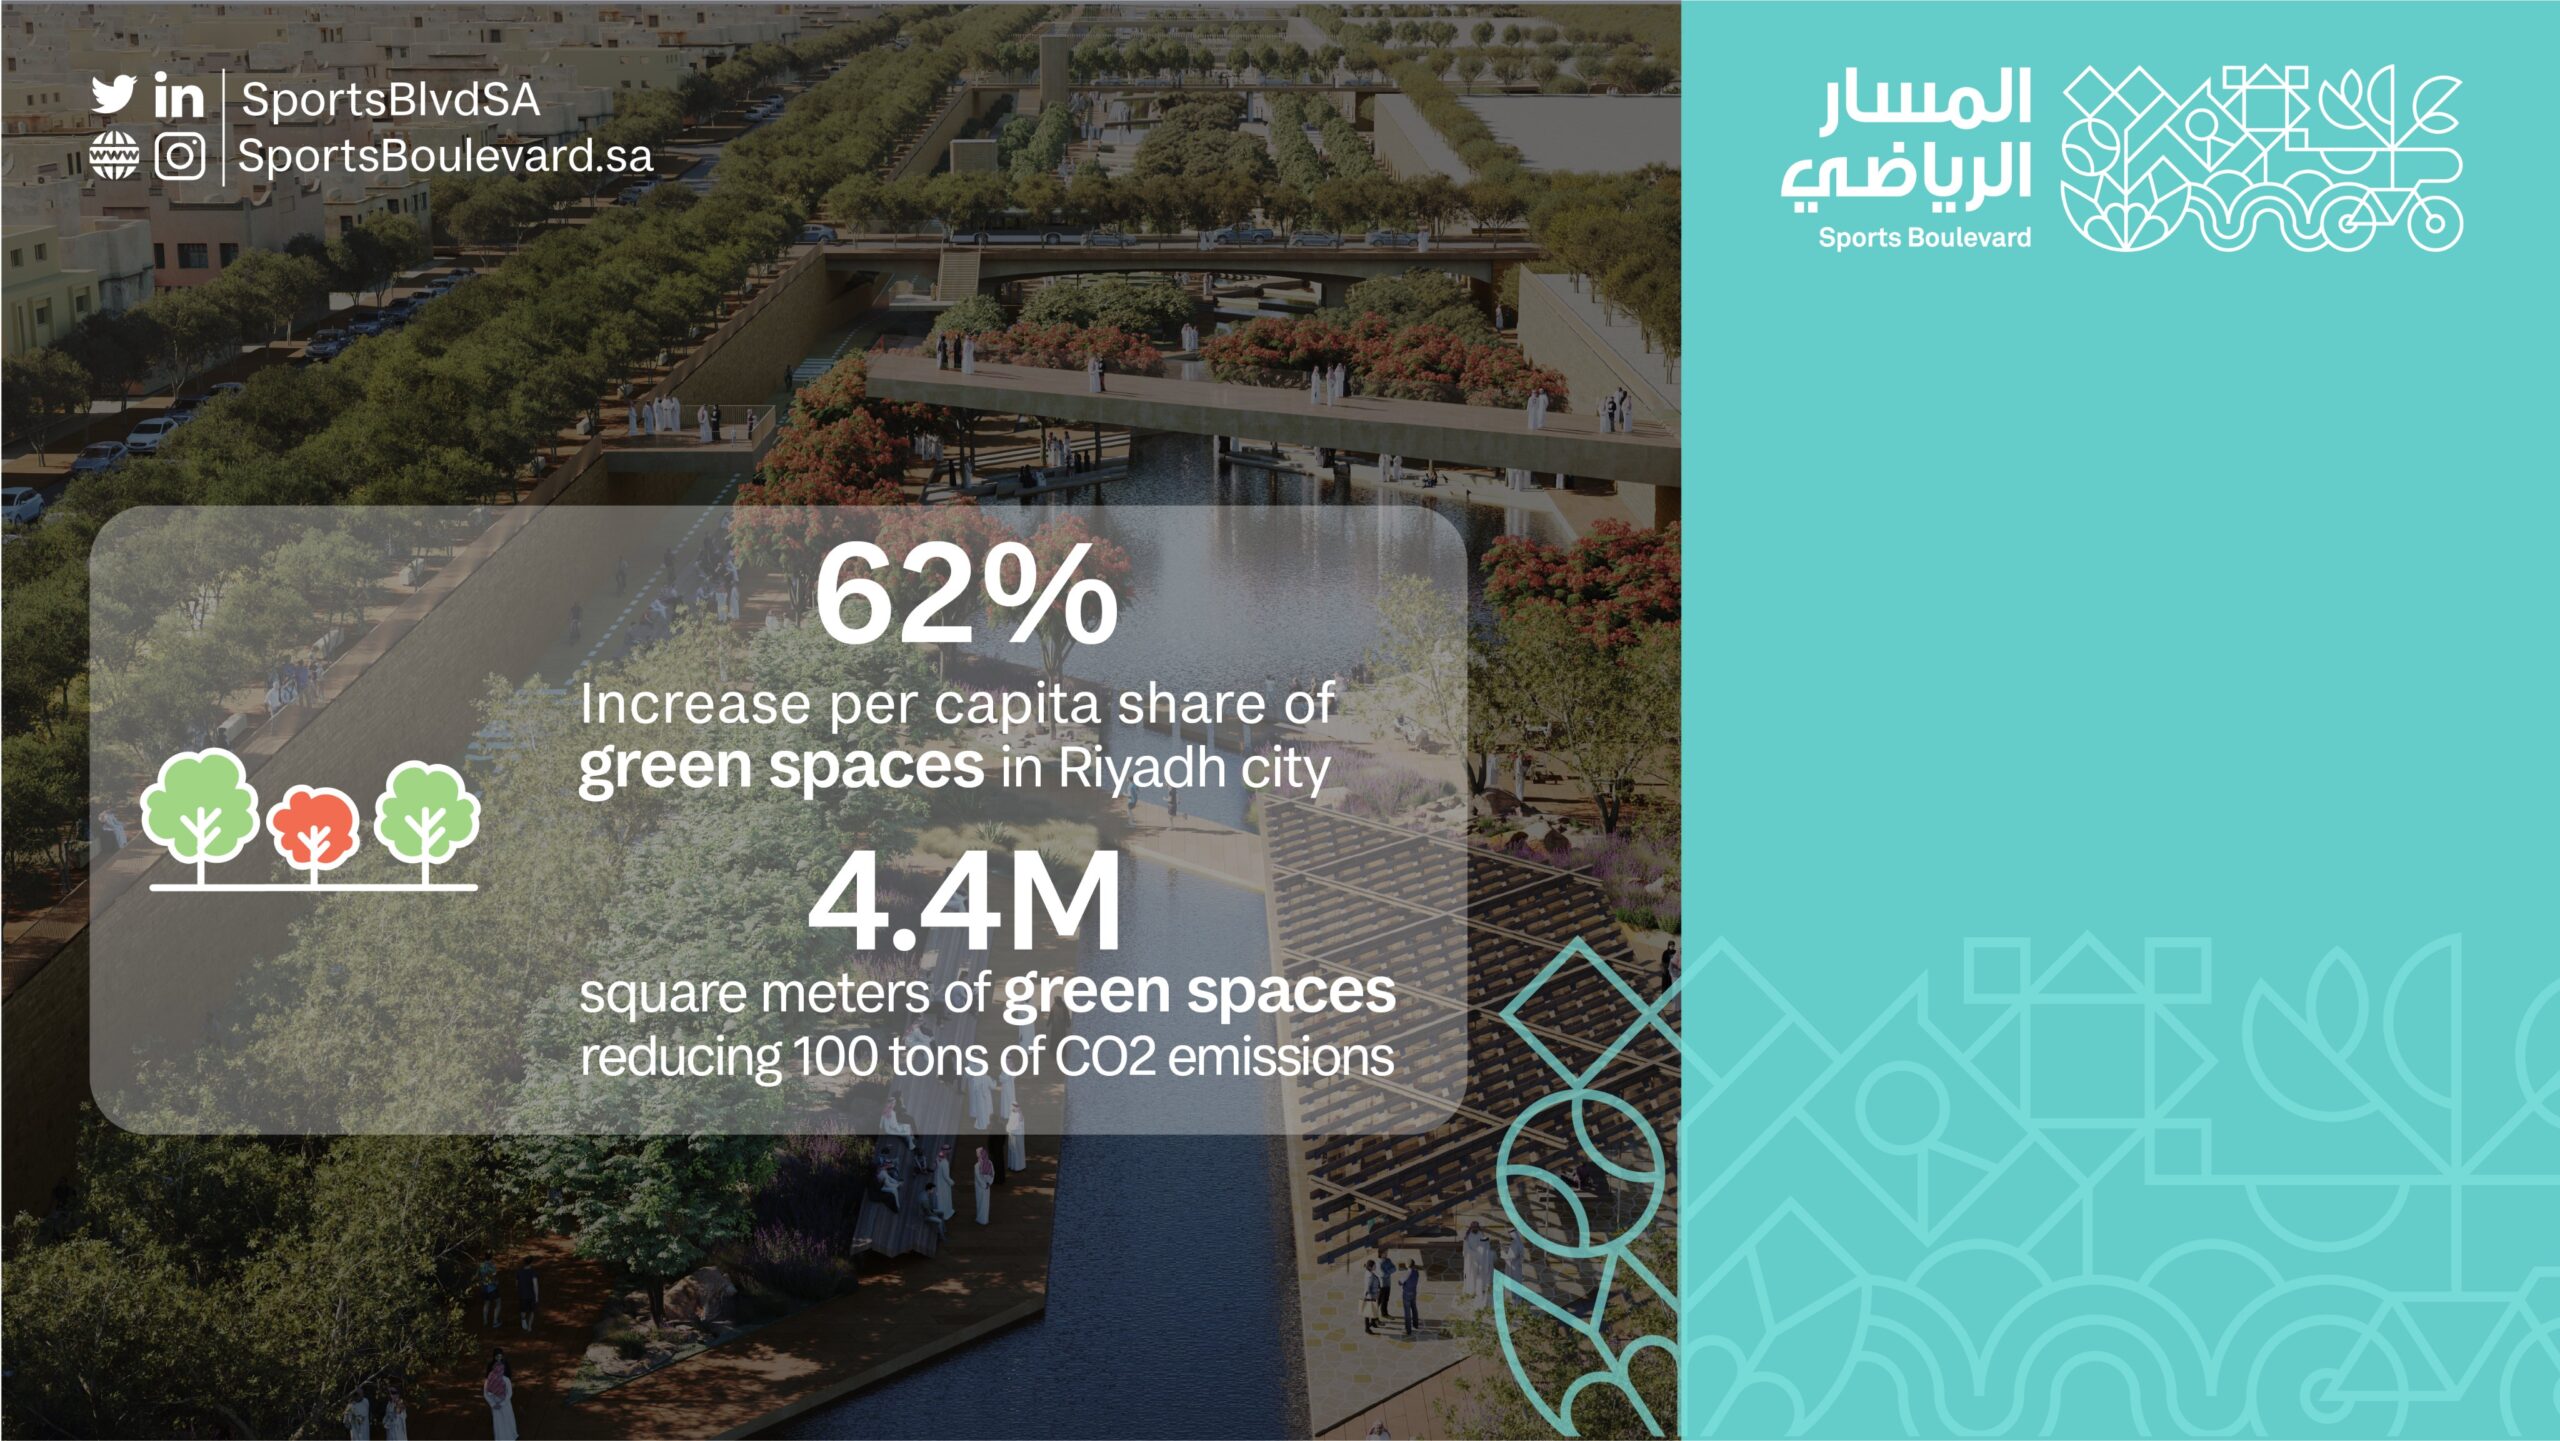 The #Sports_Boulevard will increase the per capita share of green spaces by 62% through planting more than 150,000 trees 🌳in green and open spaces in #Riyadh which encourages pursuing sports, artistic and cultural activities in the clear air